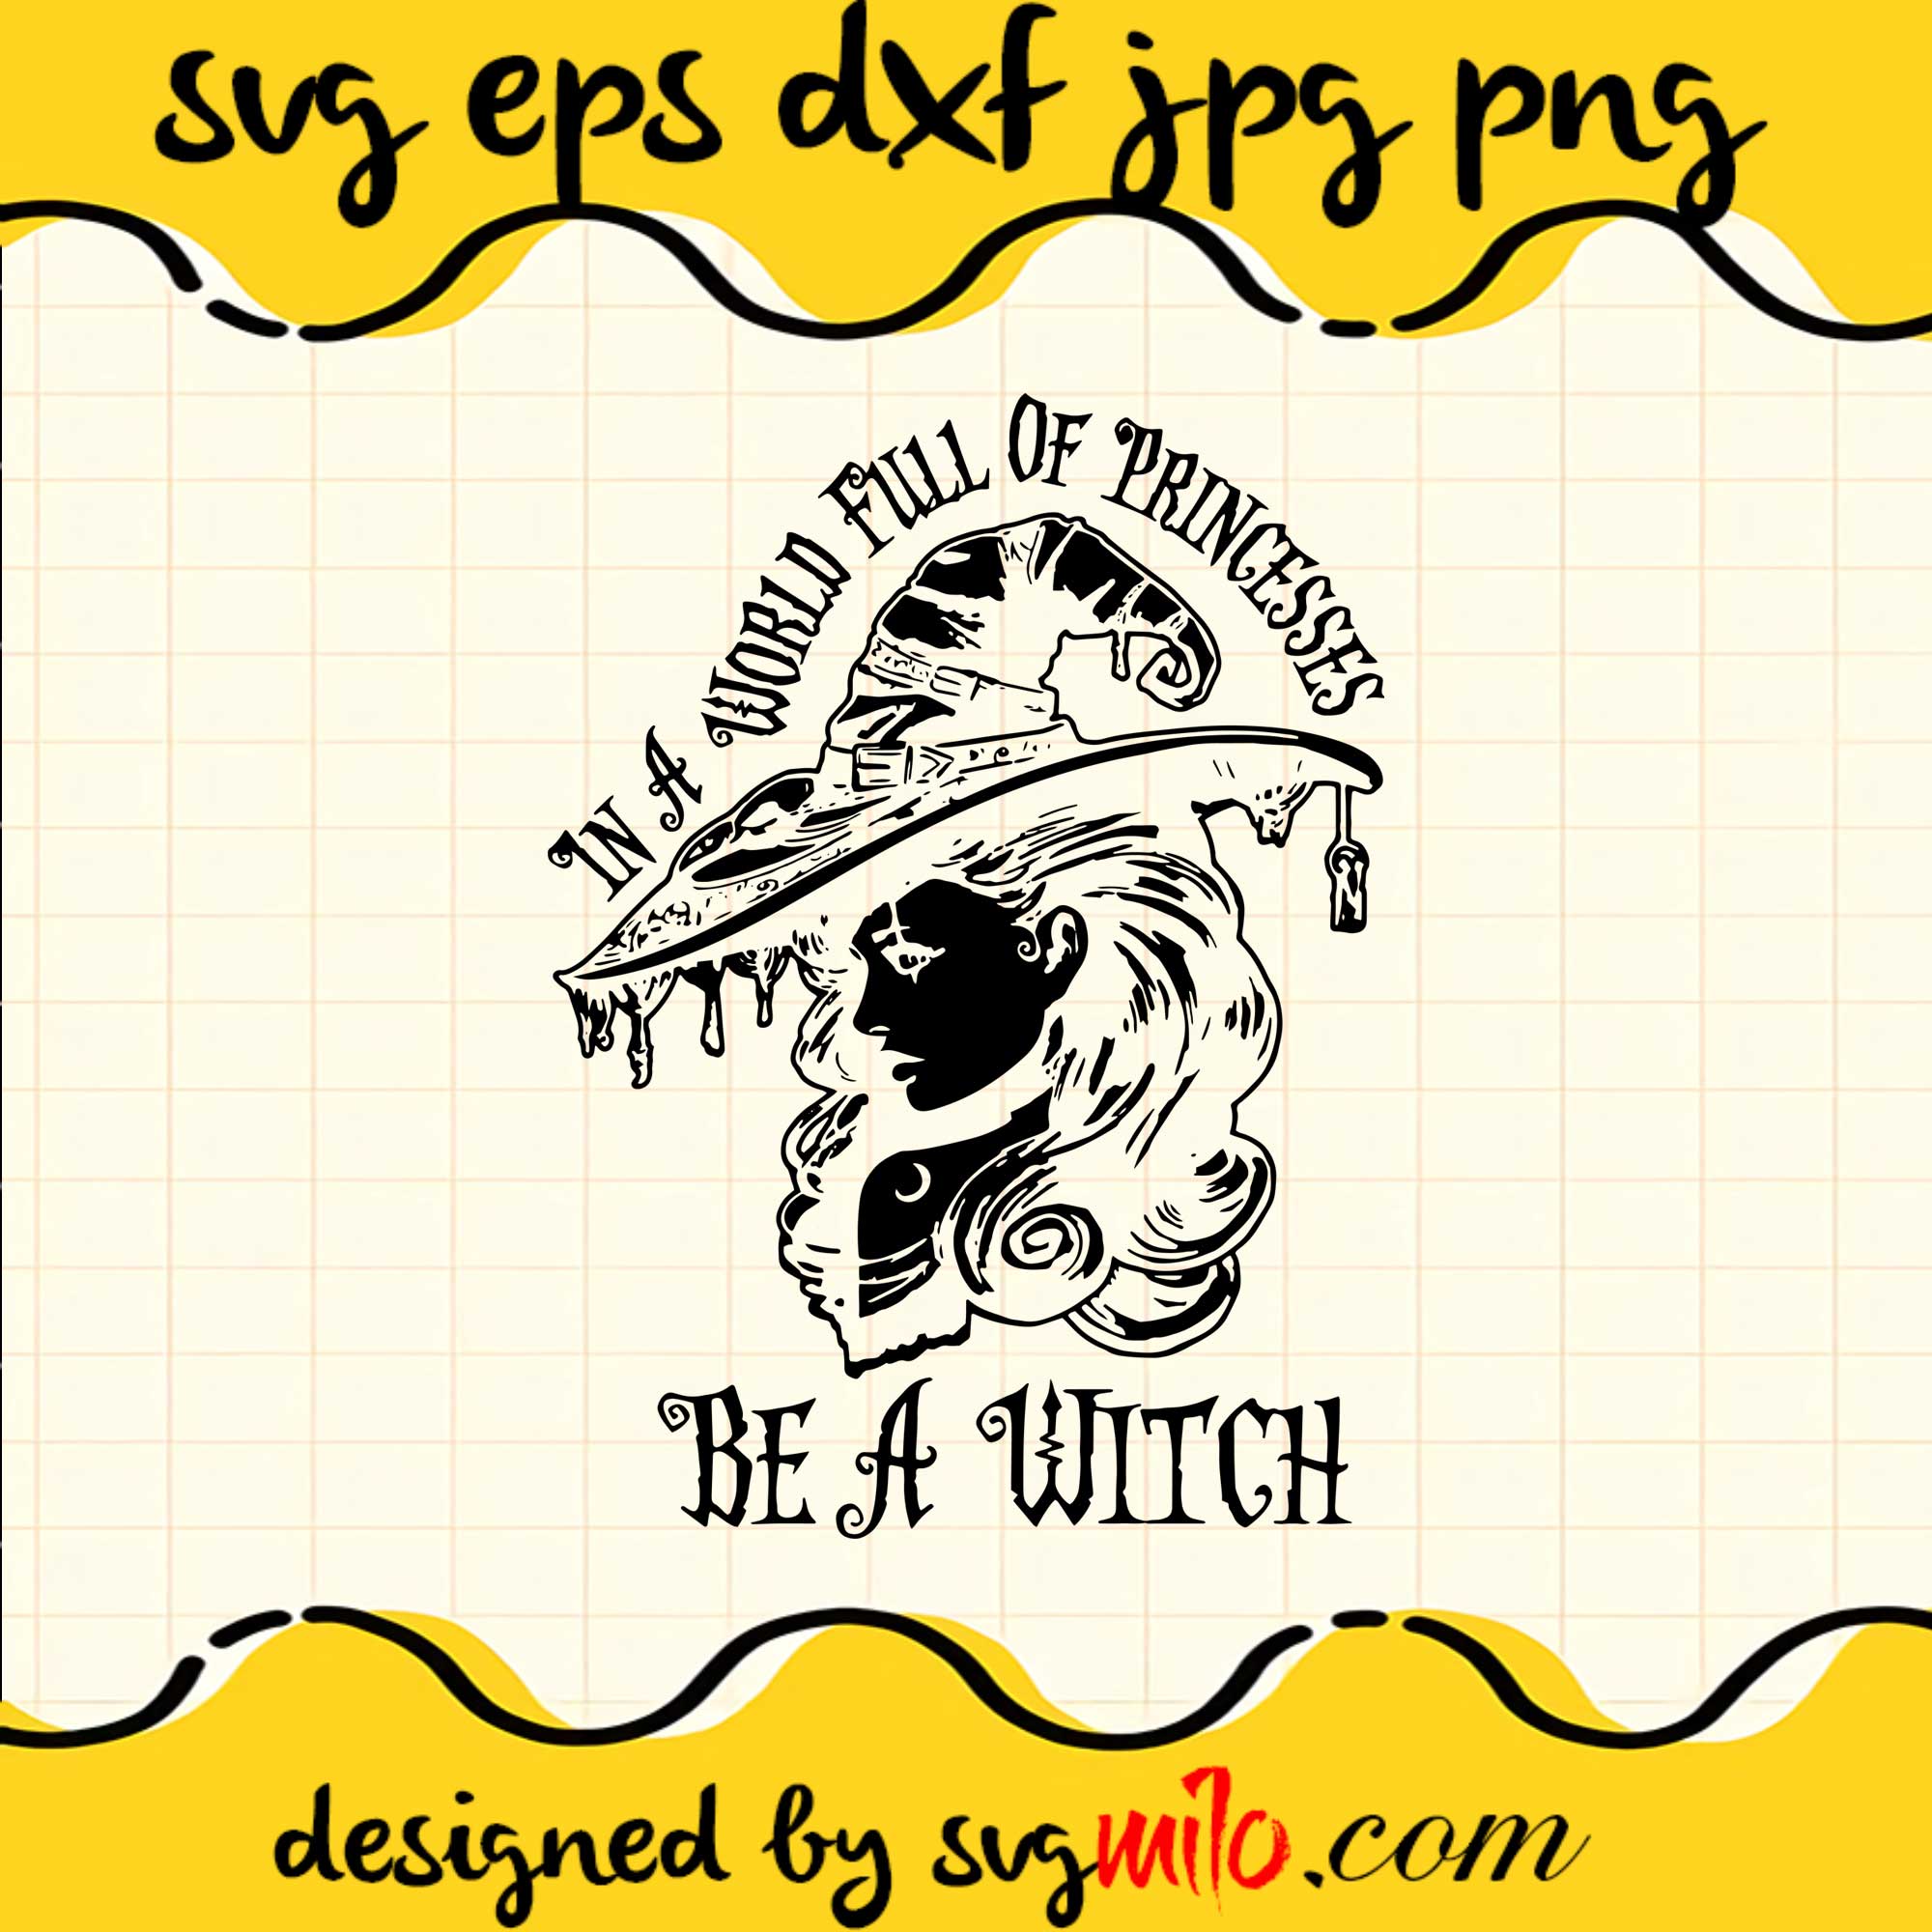 In A World Full Of Princesses Be A Witch SVG Cut Files For Cricut Silhouette,Premium Quality SVG - SVGMILO